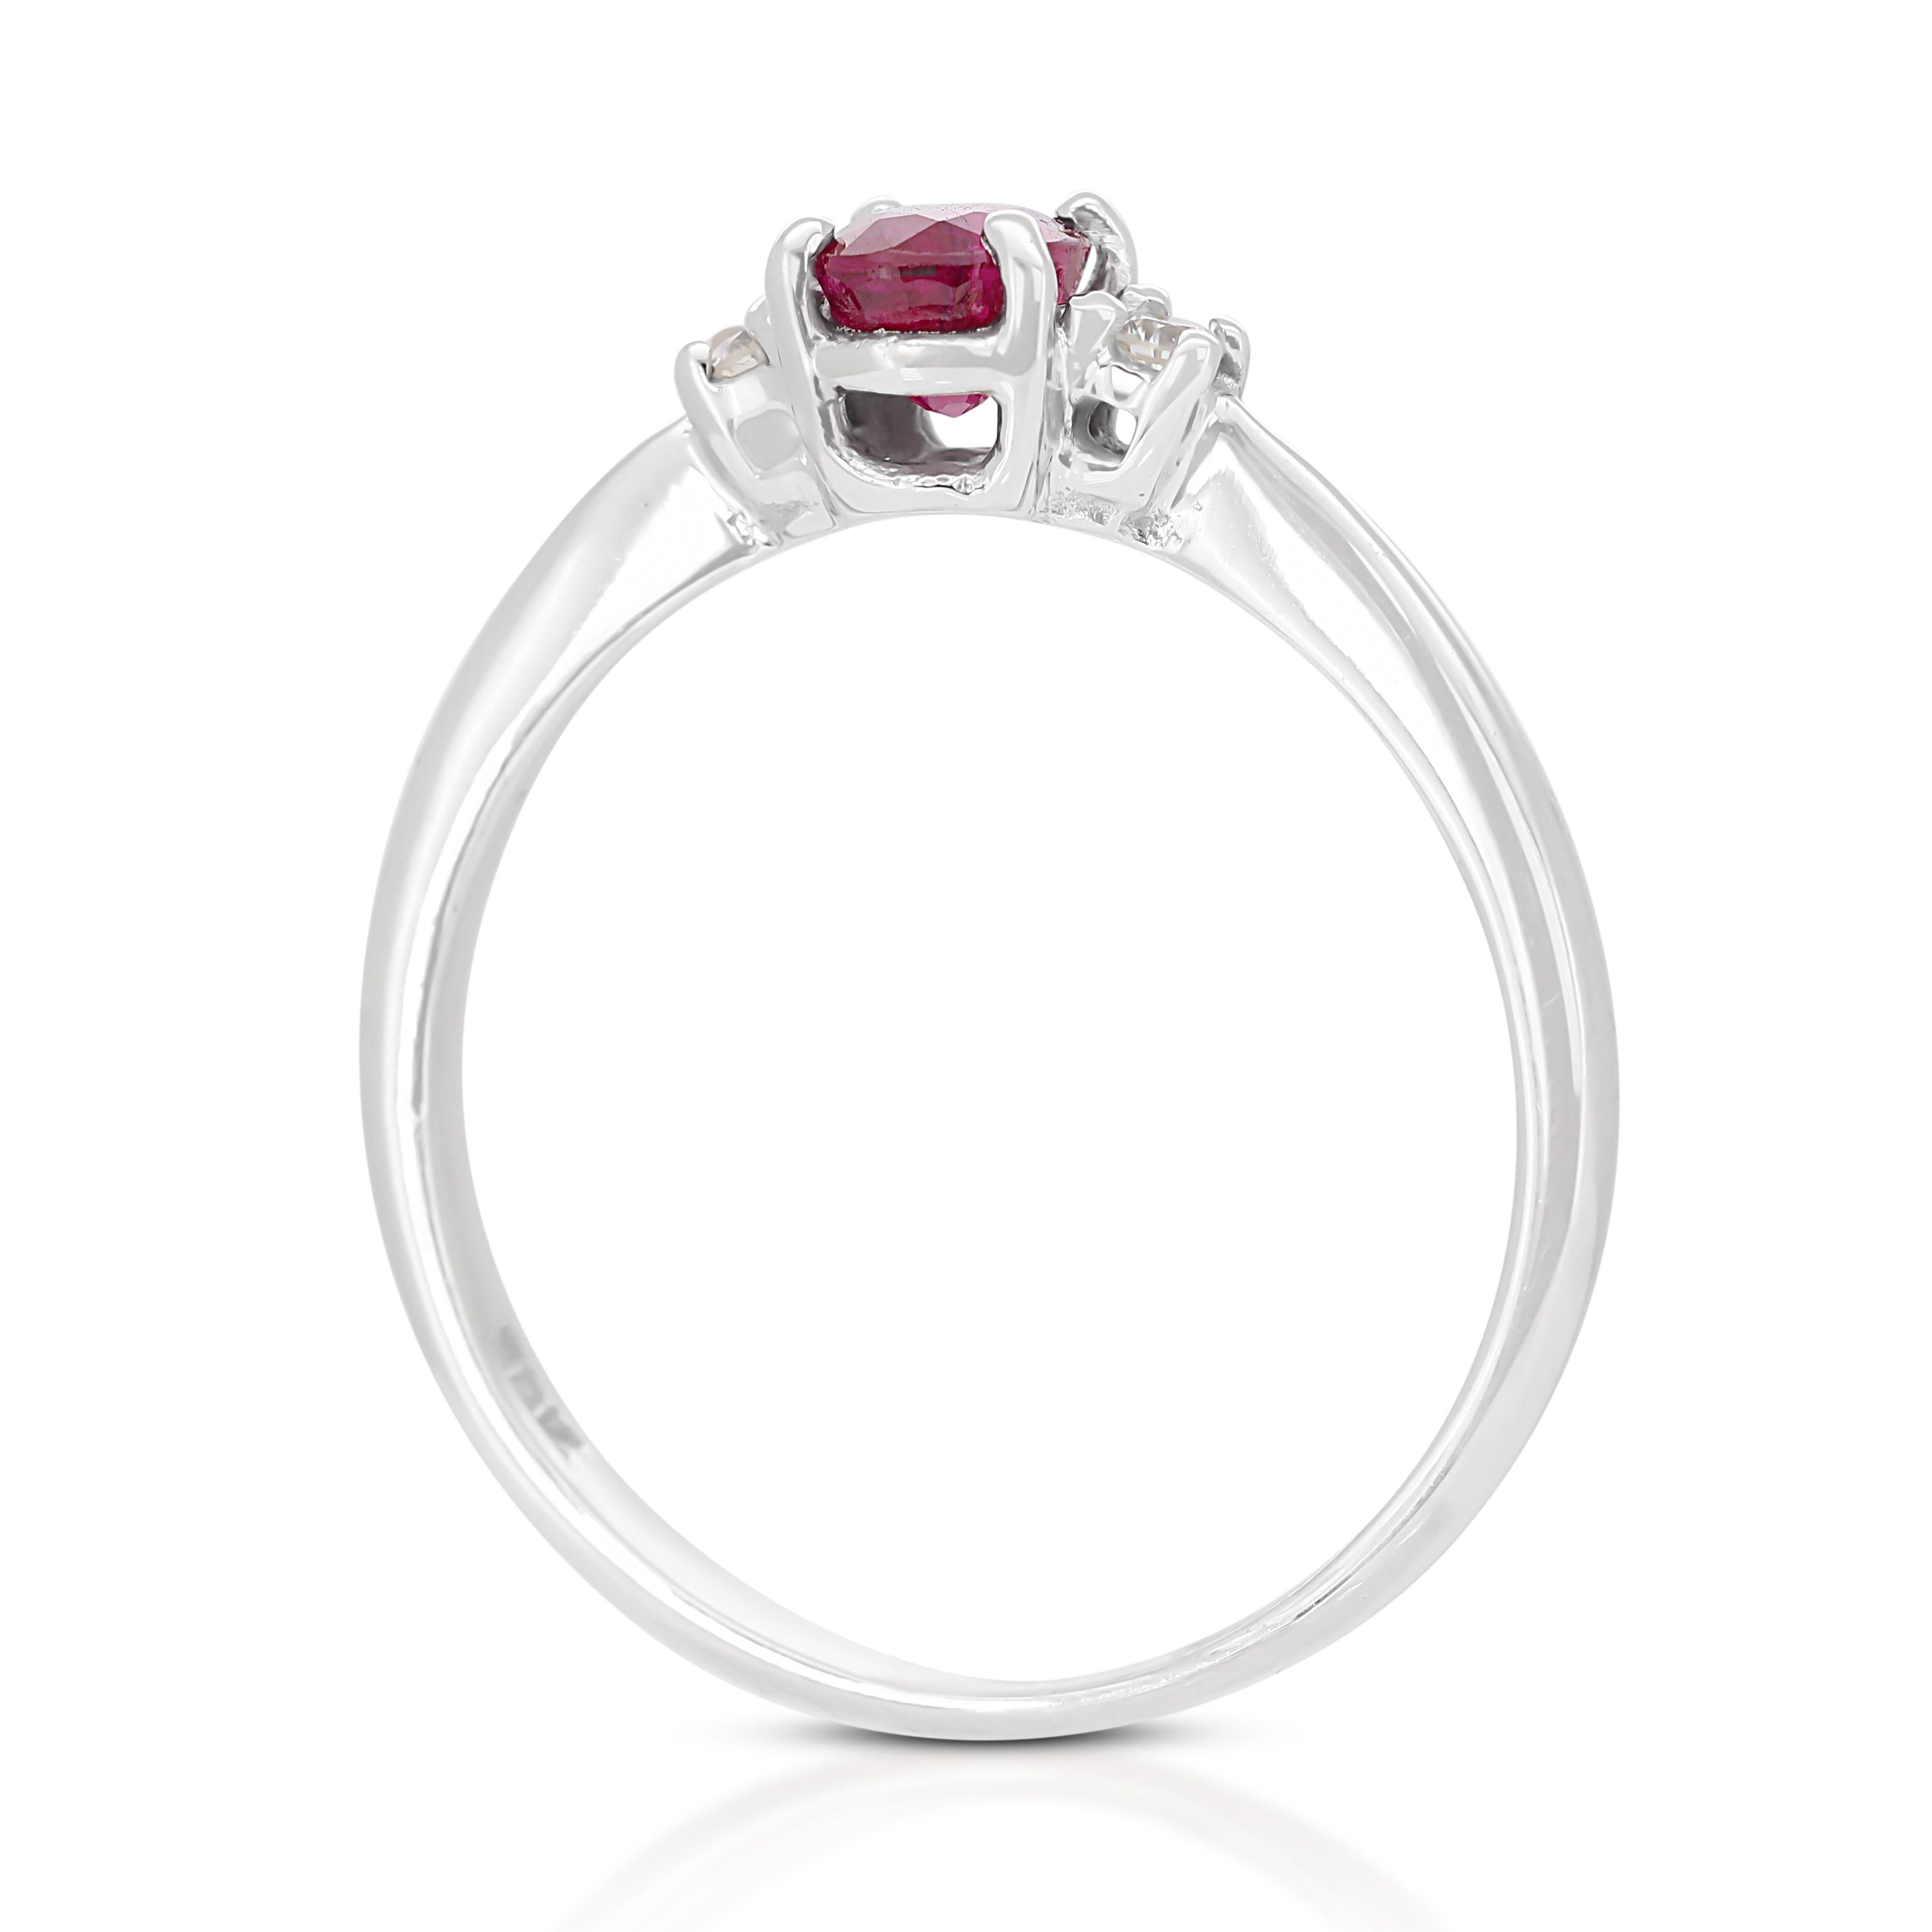 Women's Dazzling 18k White Gold 3 Stone Ring 0.34ct Natural Ruby and Diamonds NGI Cert For Sale